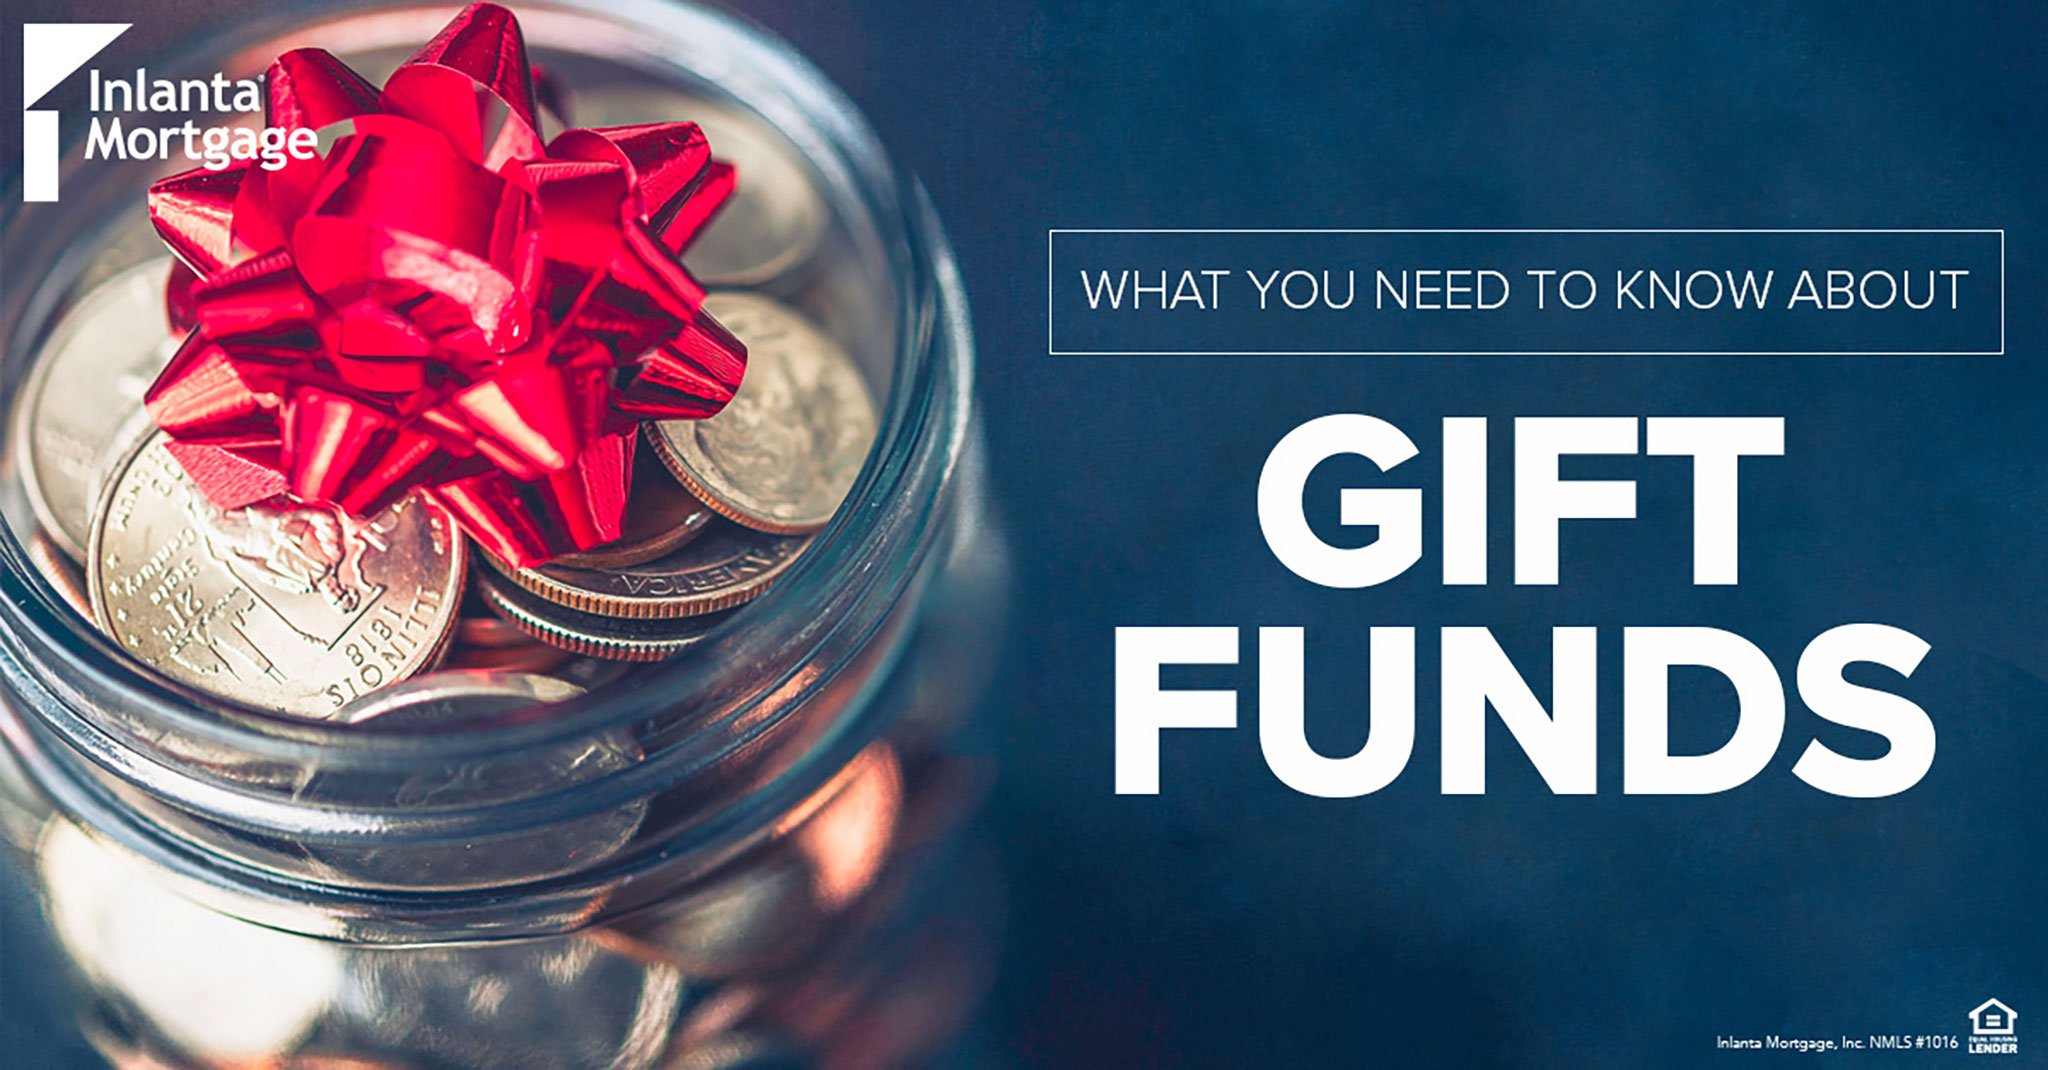 What are gift funds when buying a home